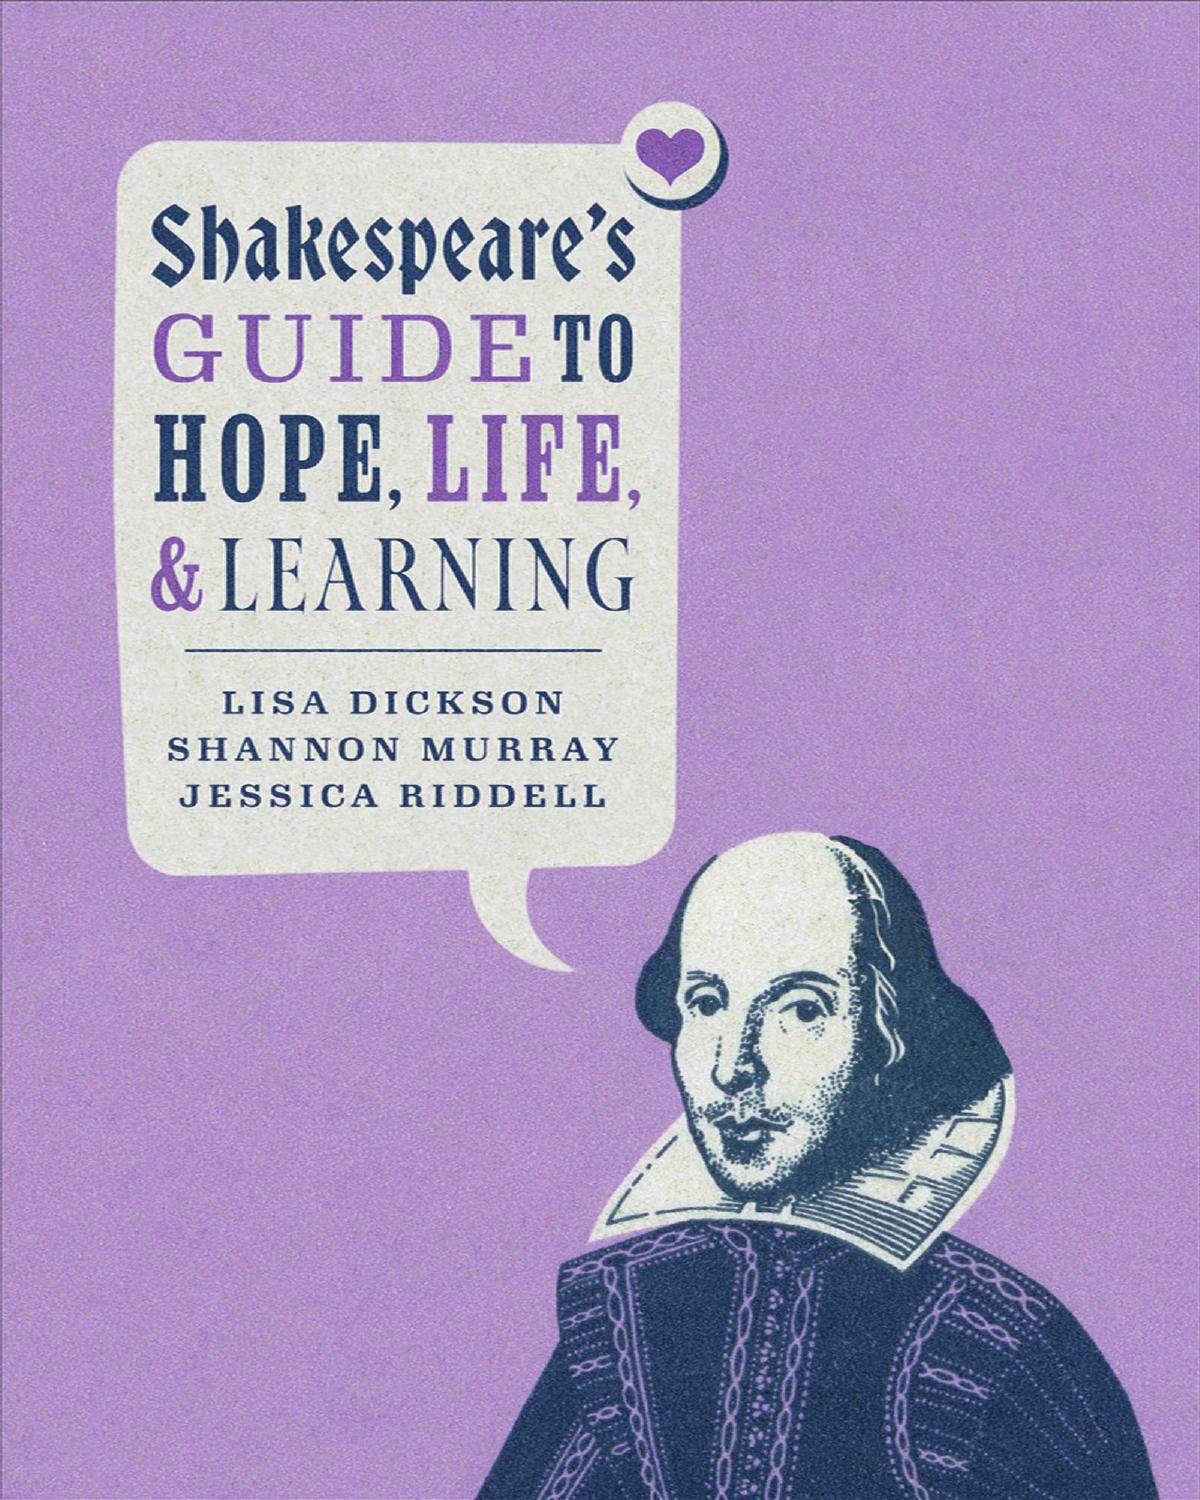 Shakespeare's Guide to Hope, Life, and Learning by Lisa Dickson;Shannon Murray;Jessica Riddell;